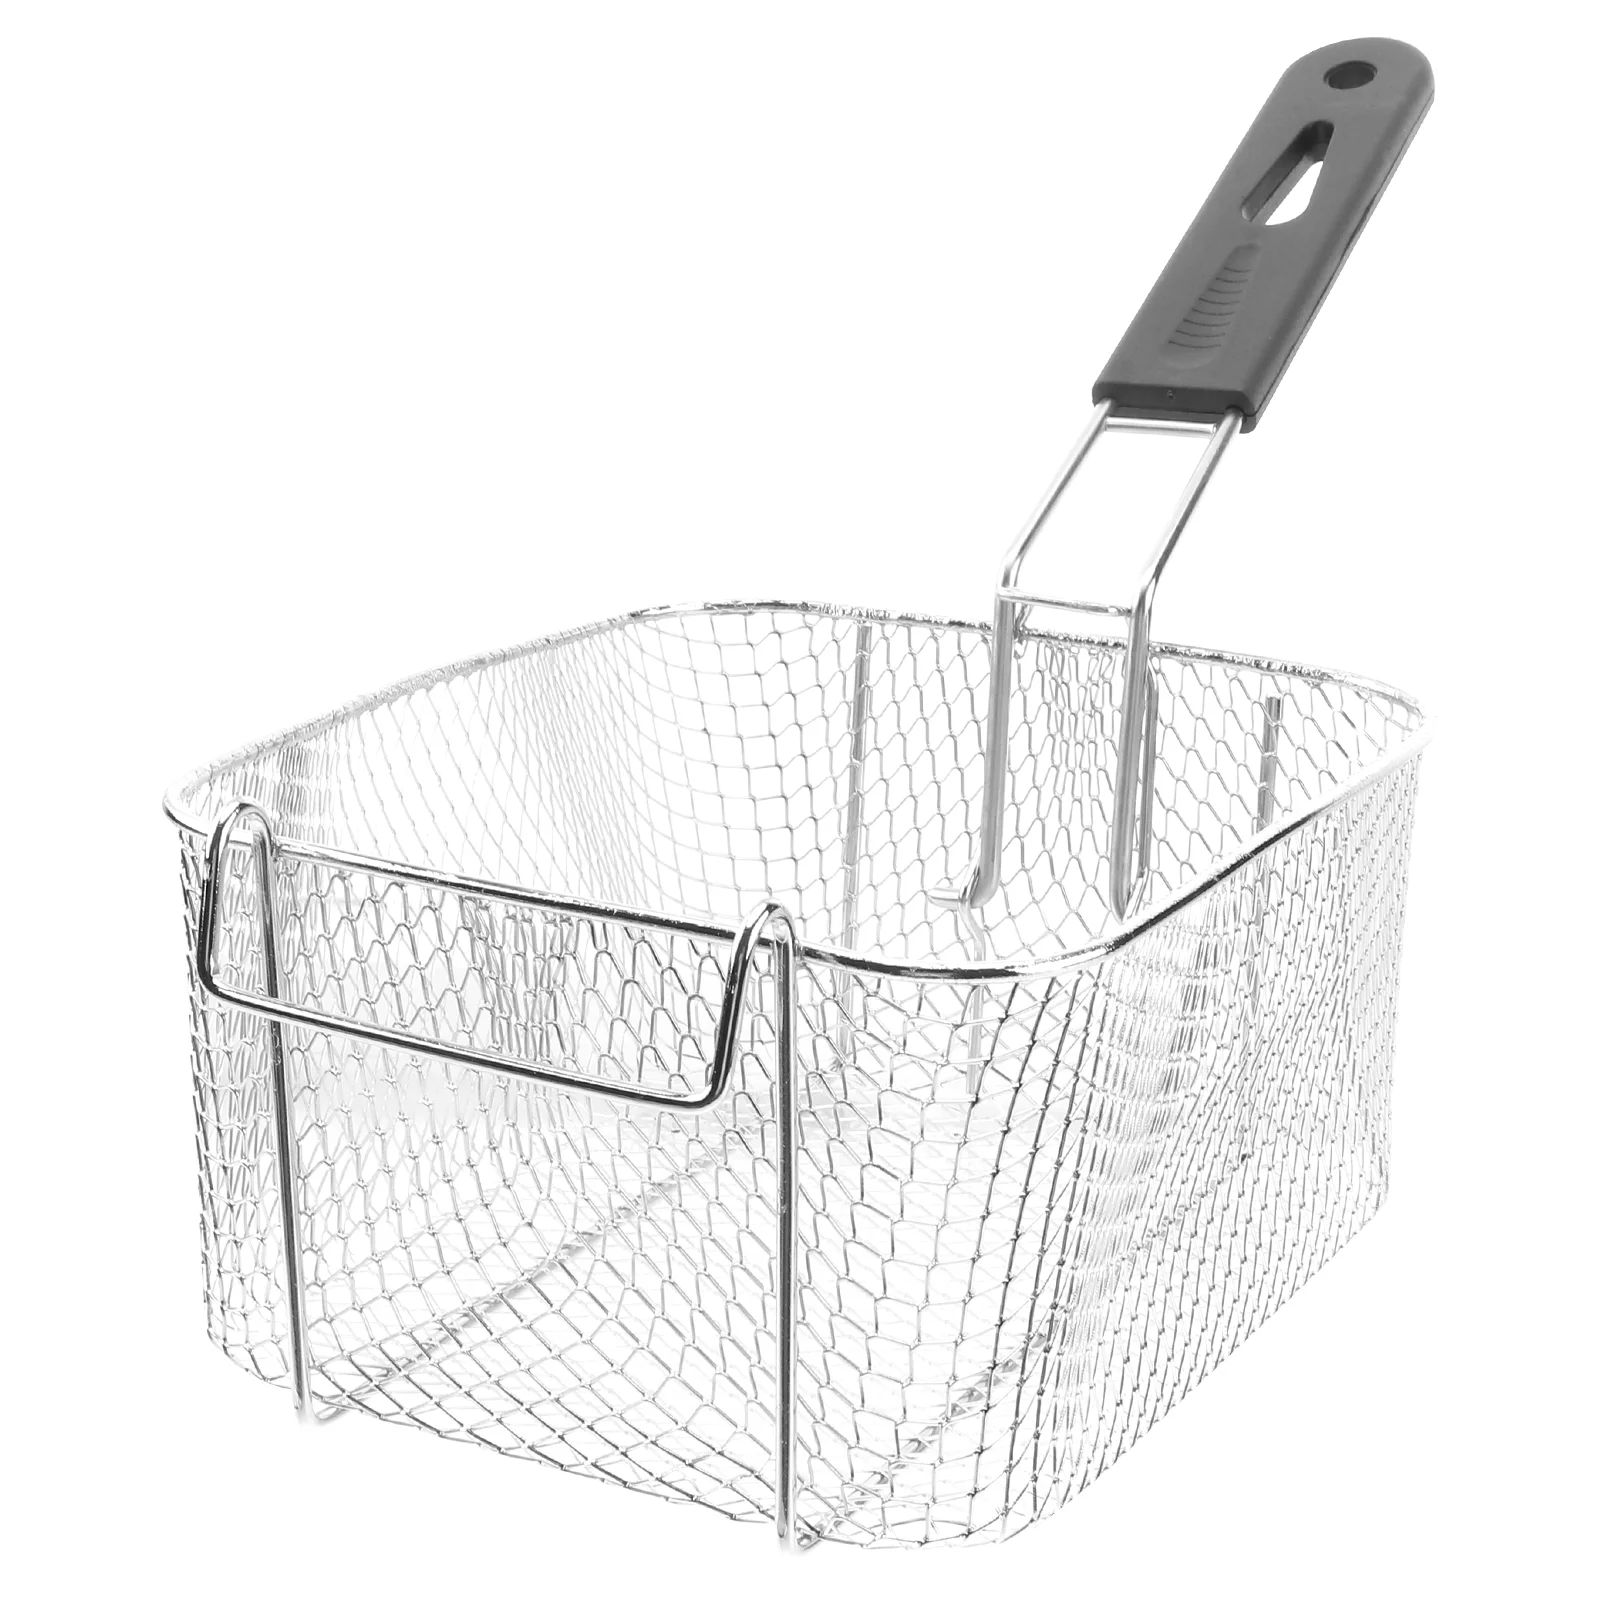 

Deep Fry Basket Stainless Steel Square French Fry Basket Holder with Long Handle Wire Frying Strainer for Chips Onion Rings